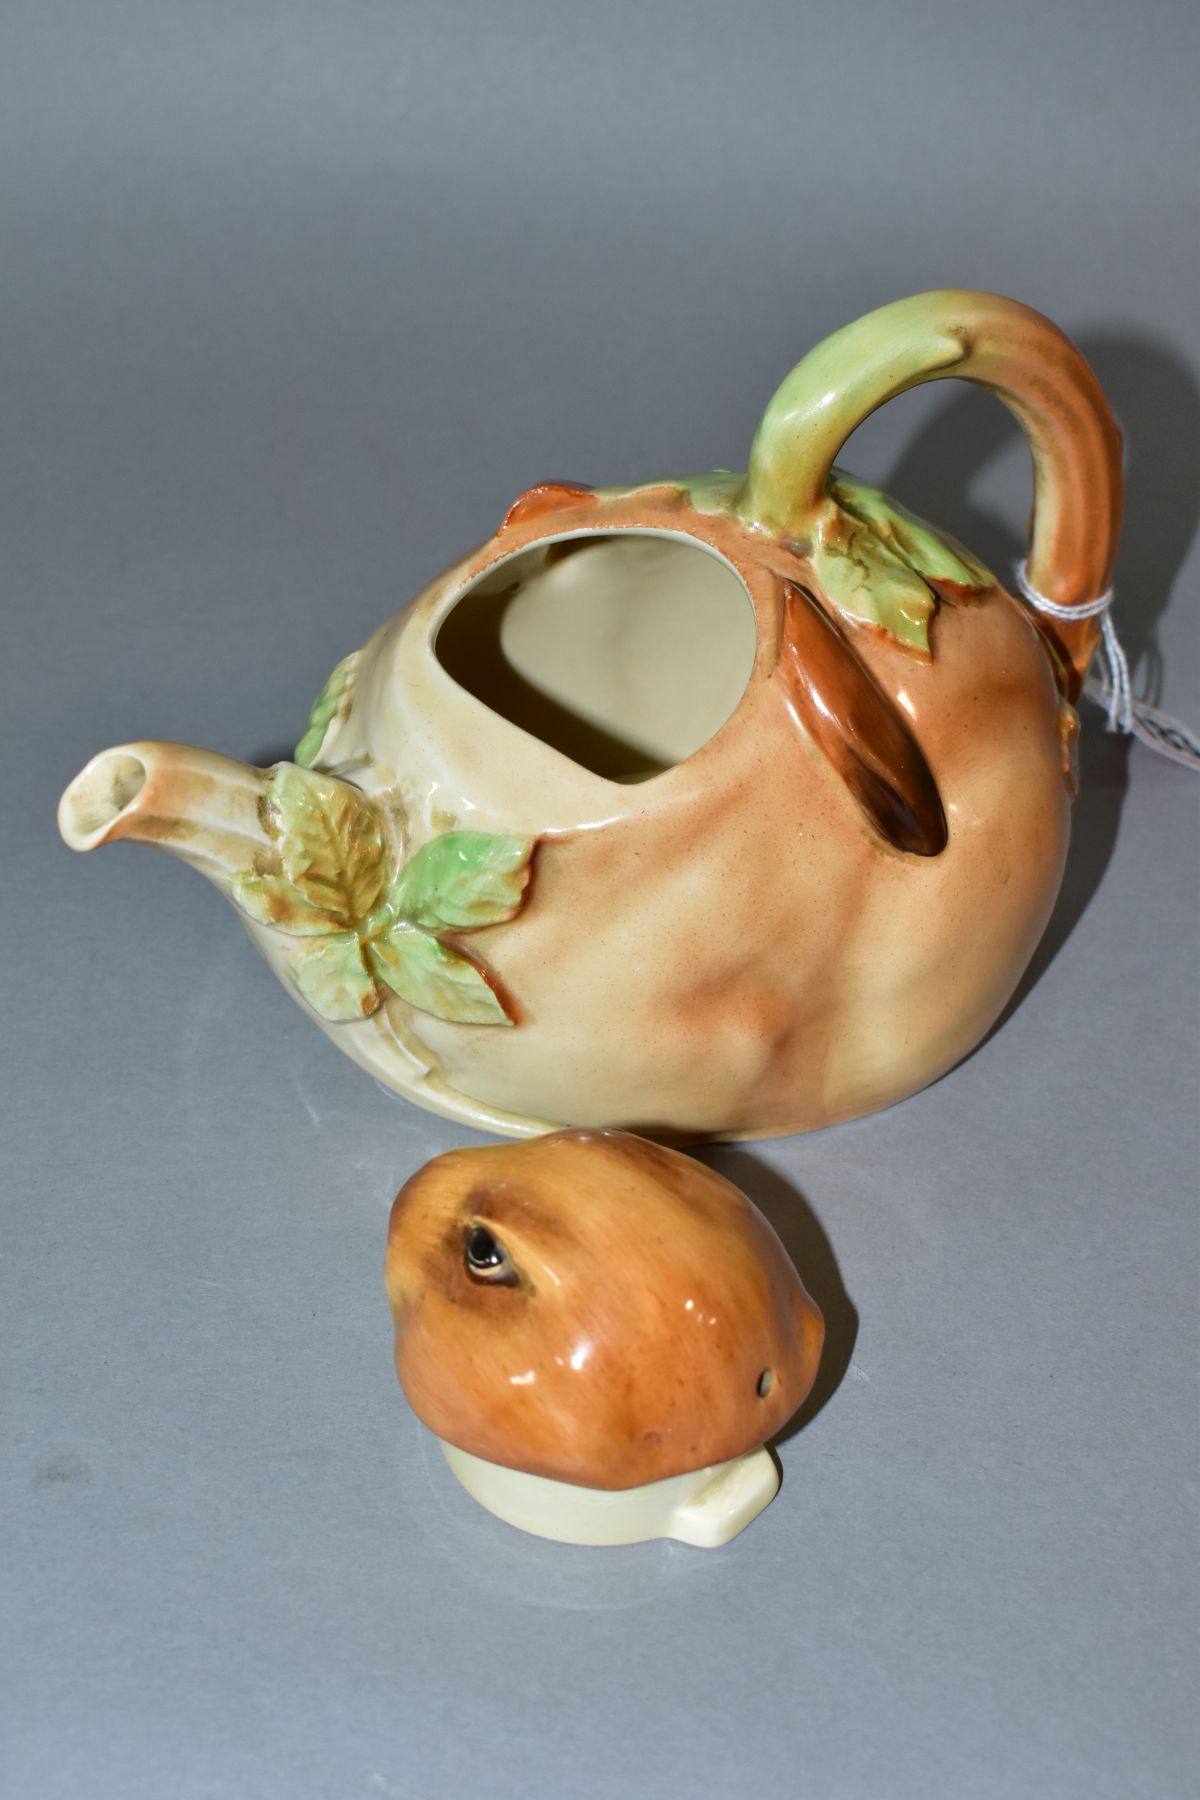 A 1930'S/40'S ROYAL DOULTON BUNNYKINS EARTHENWARE TEAPOT, D6010, designed by Charles Noke, shaped as - Image 4 of 5